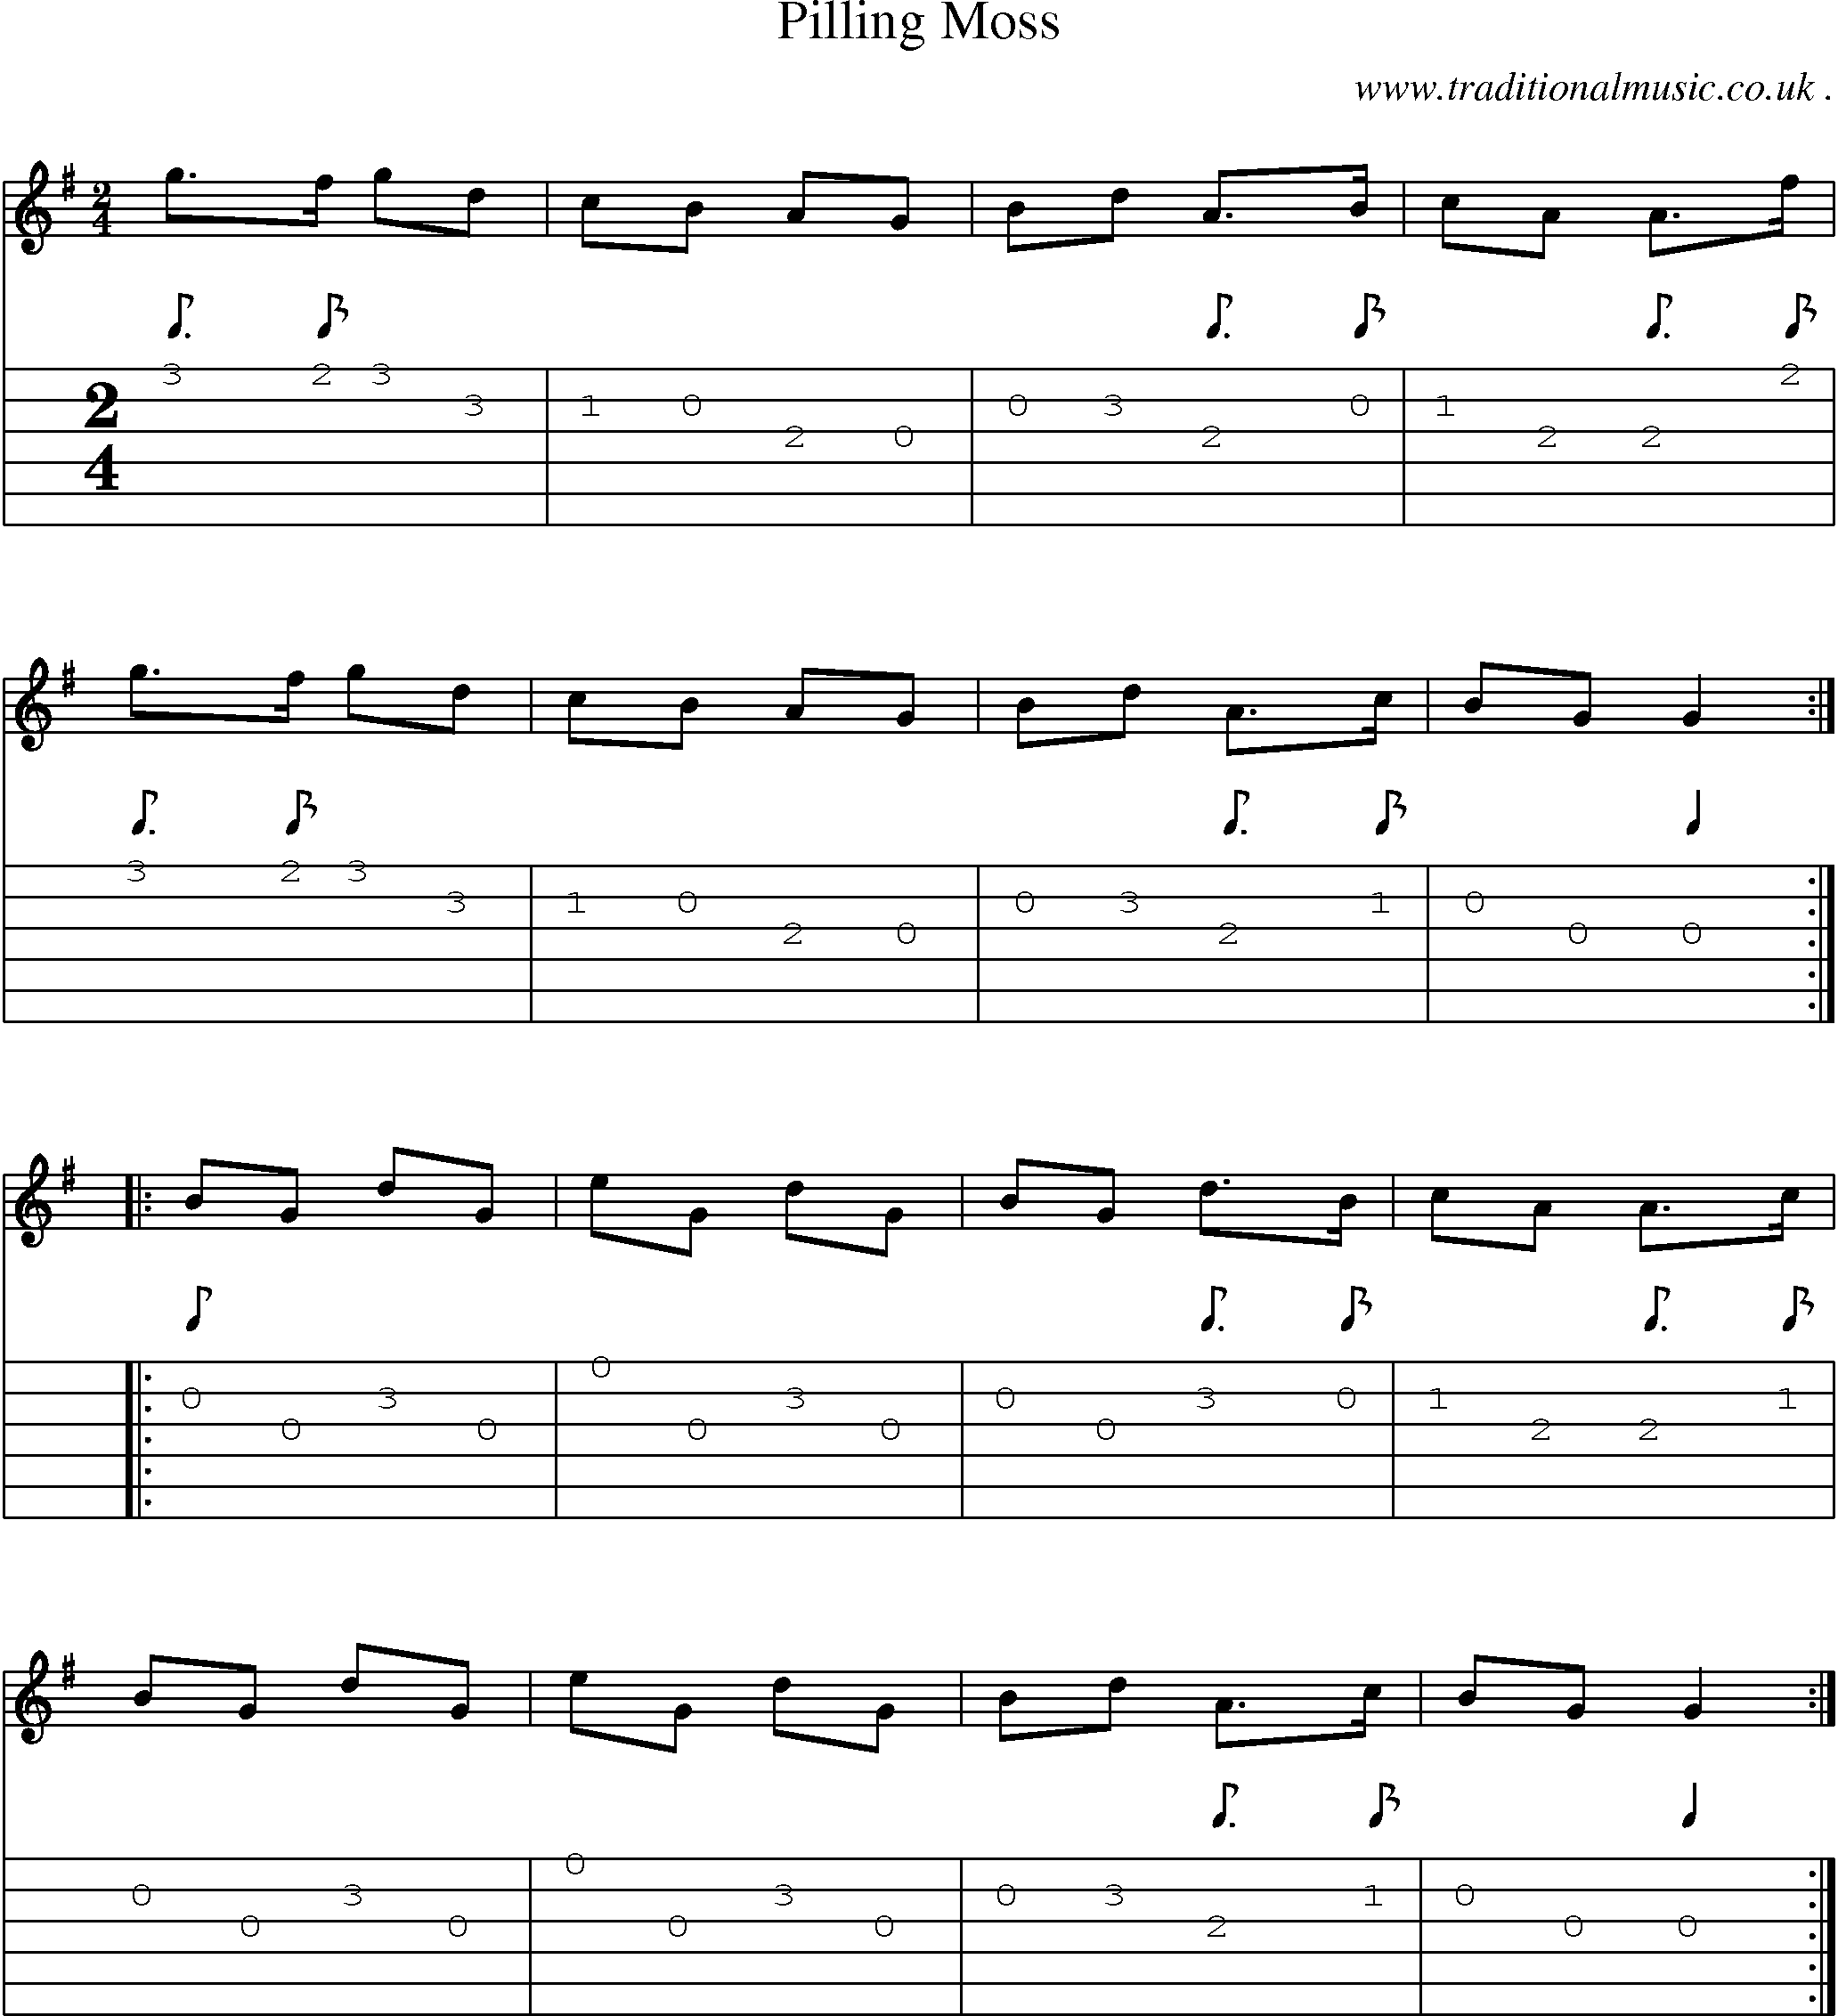 Sheet-Music and Guitar Tabs for Pilling Moss 